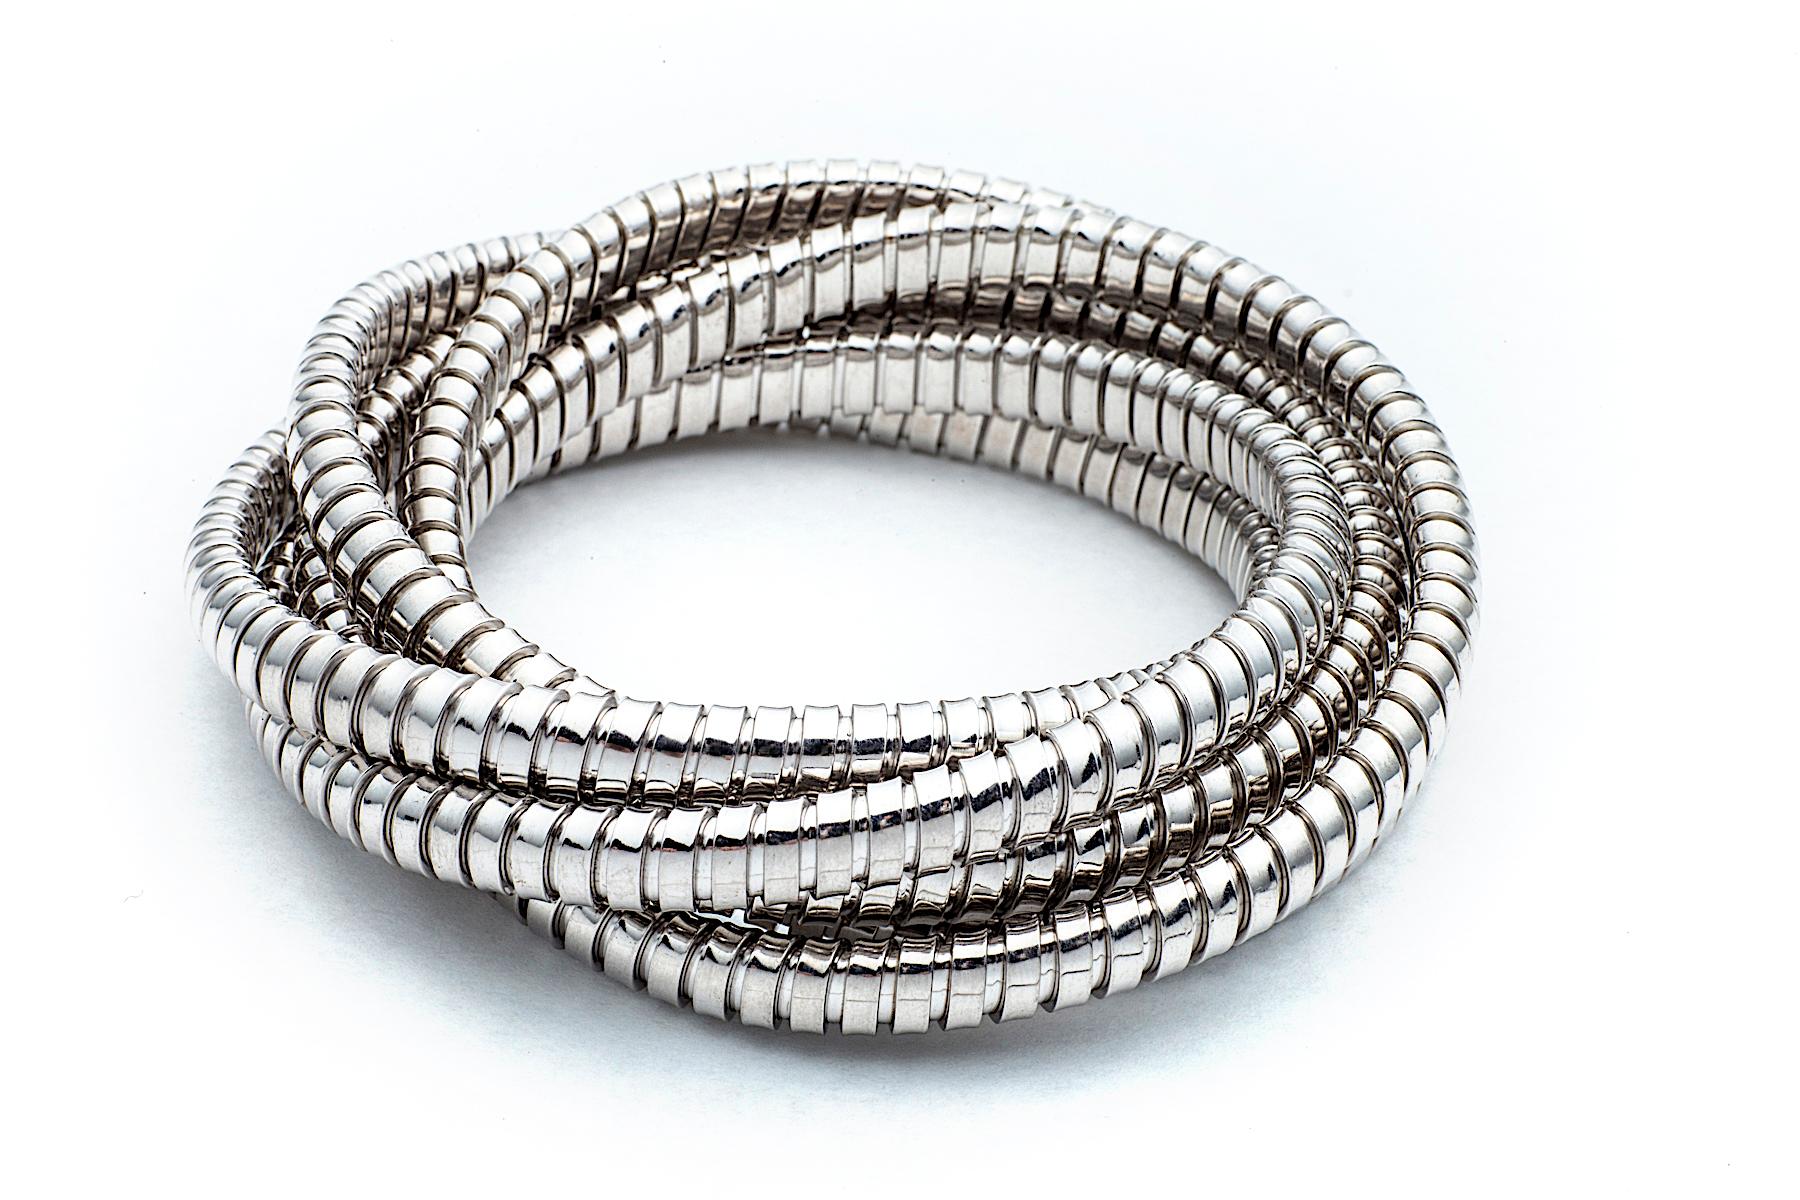 With a timeless but modern style, this chic intertwined six strand 6.5 mm tubogas rolling bangle bracelet was originally inspired by the flexible automotive gas tubing of the 1920’s. Translated into sterling silver and easily stacked with other